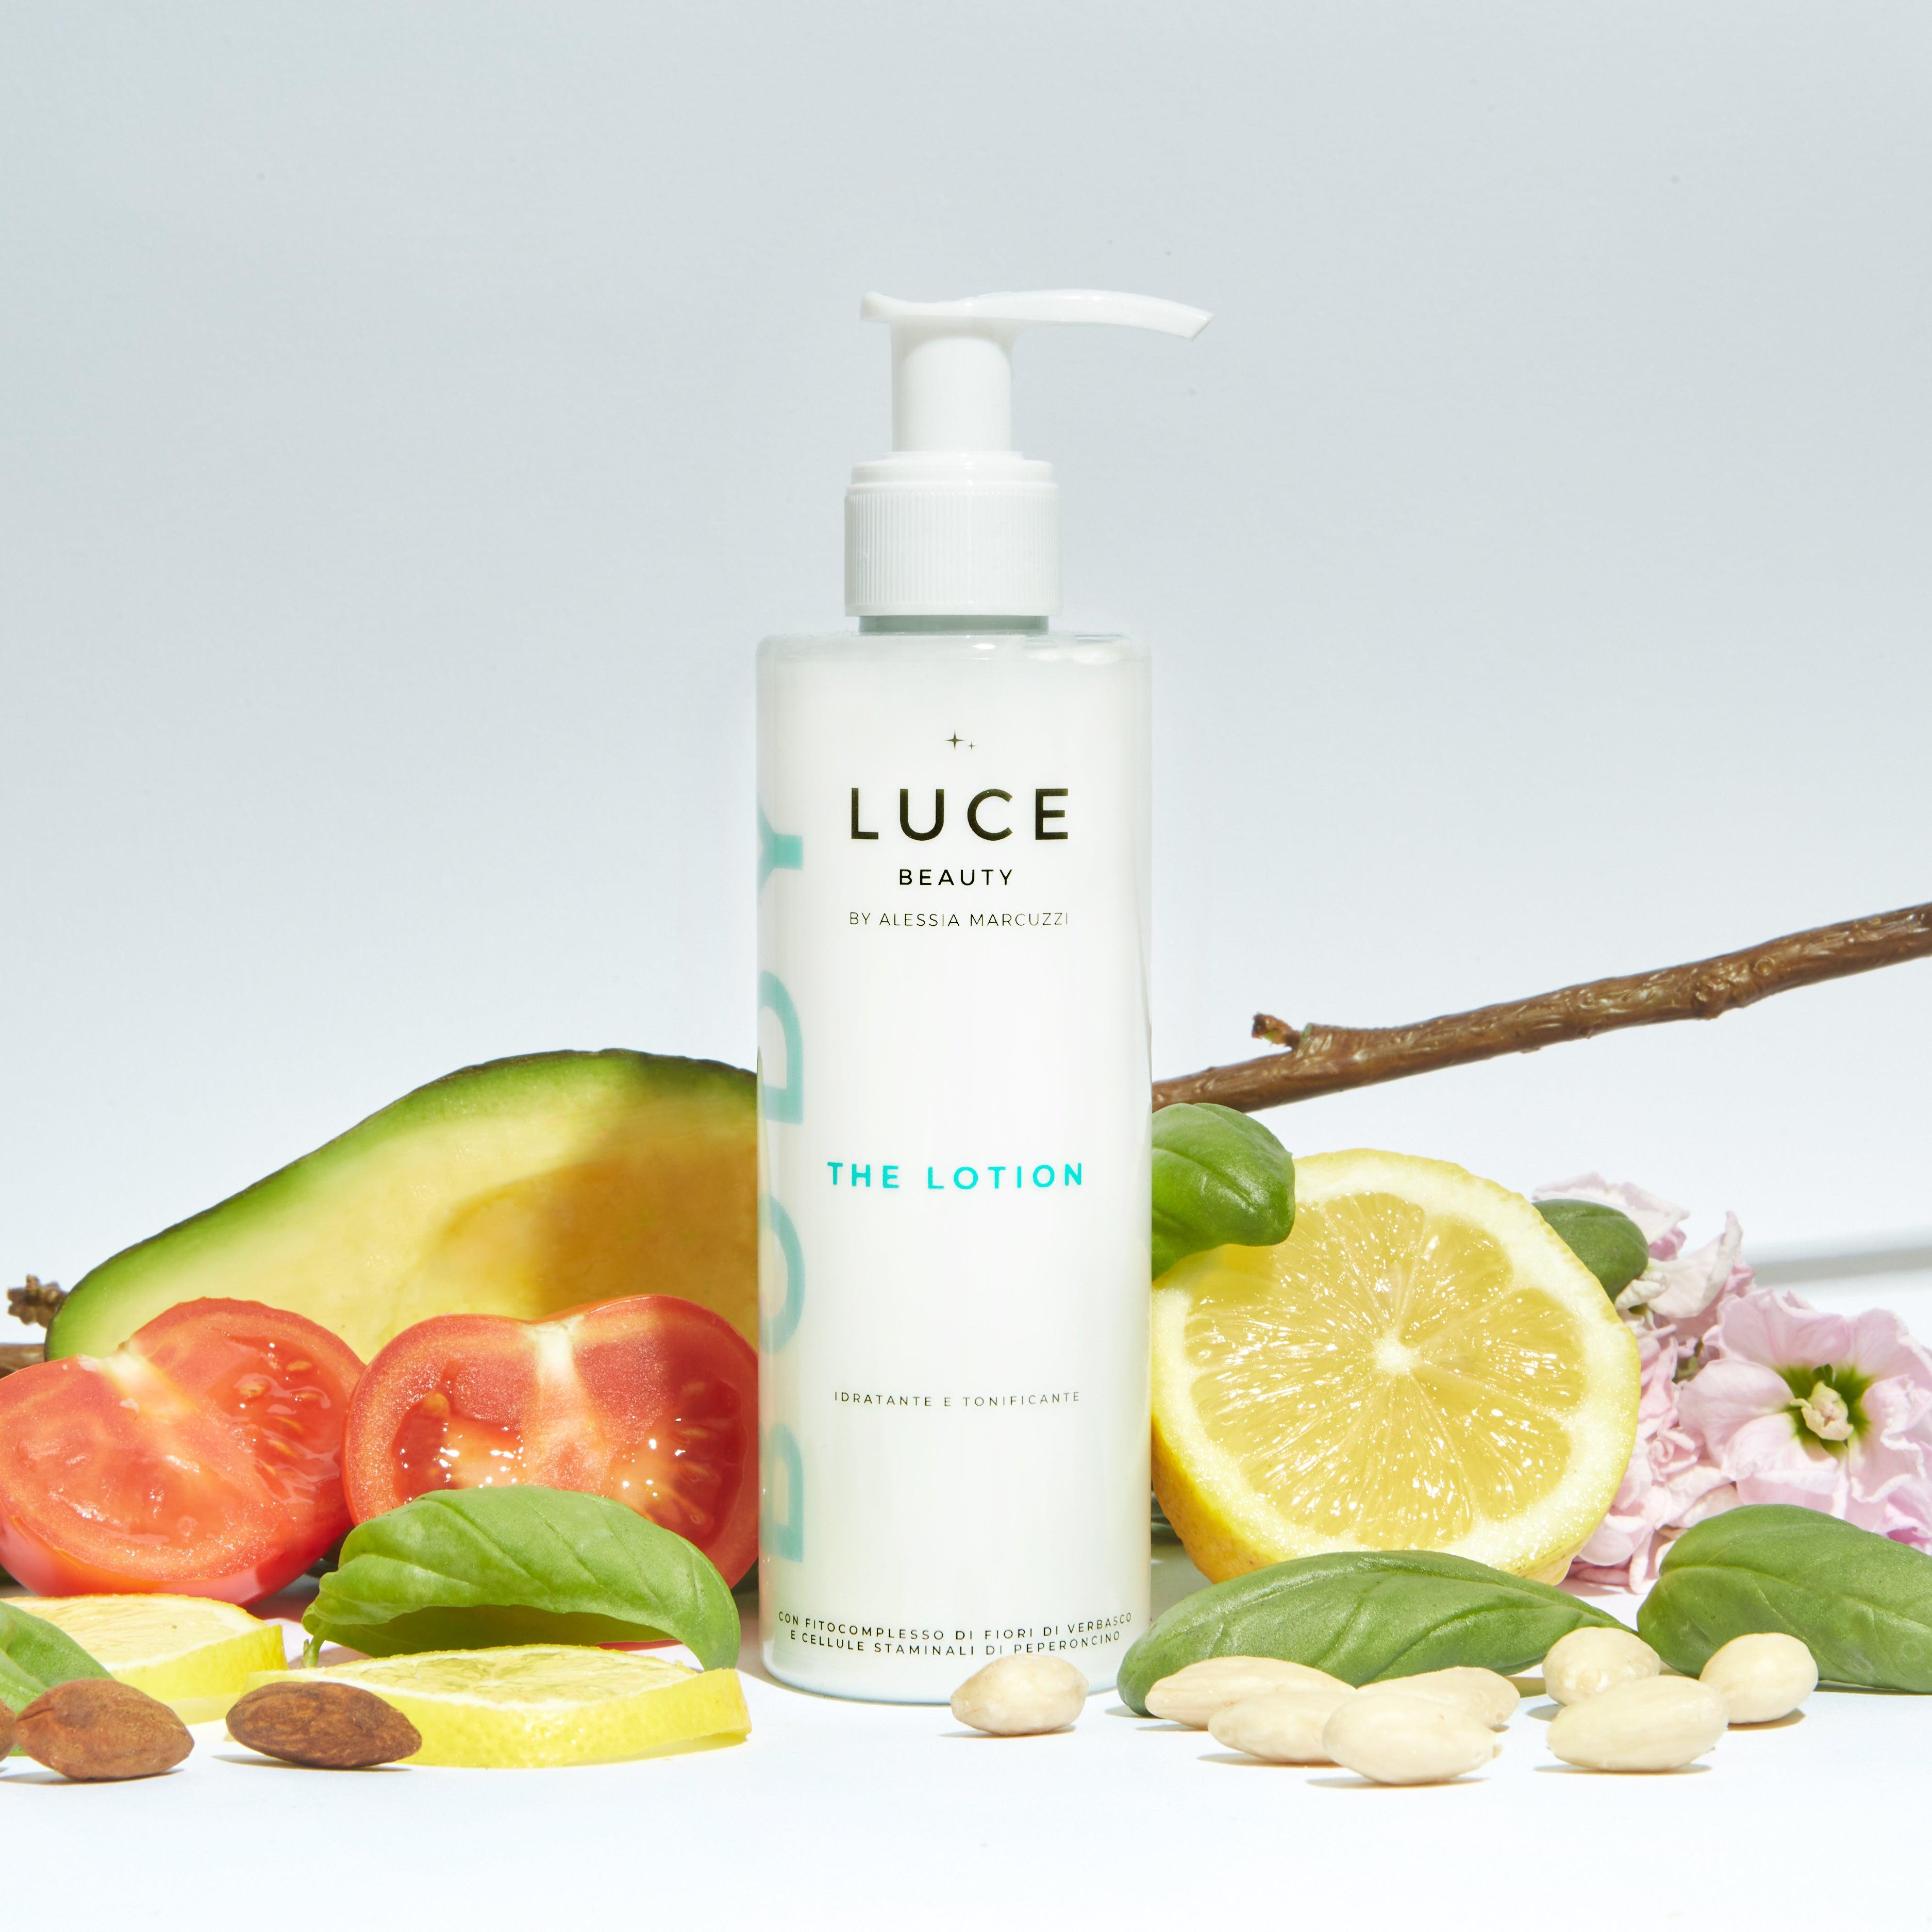 The Lotion - Ingredienti - Luce Beauty by Alessia Marcuzzi